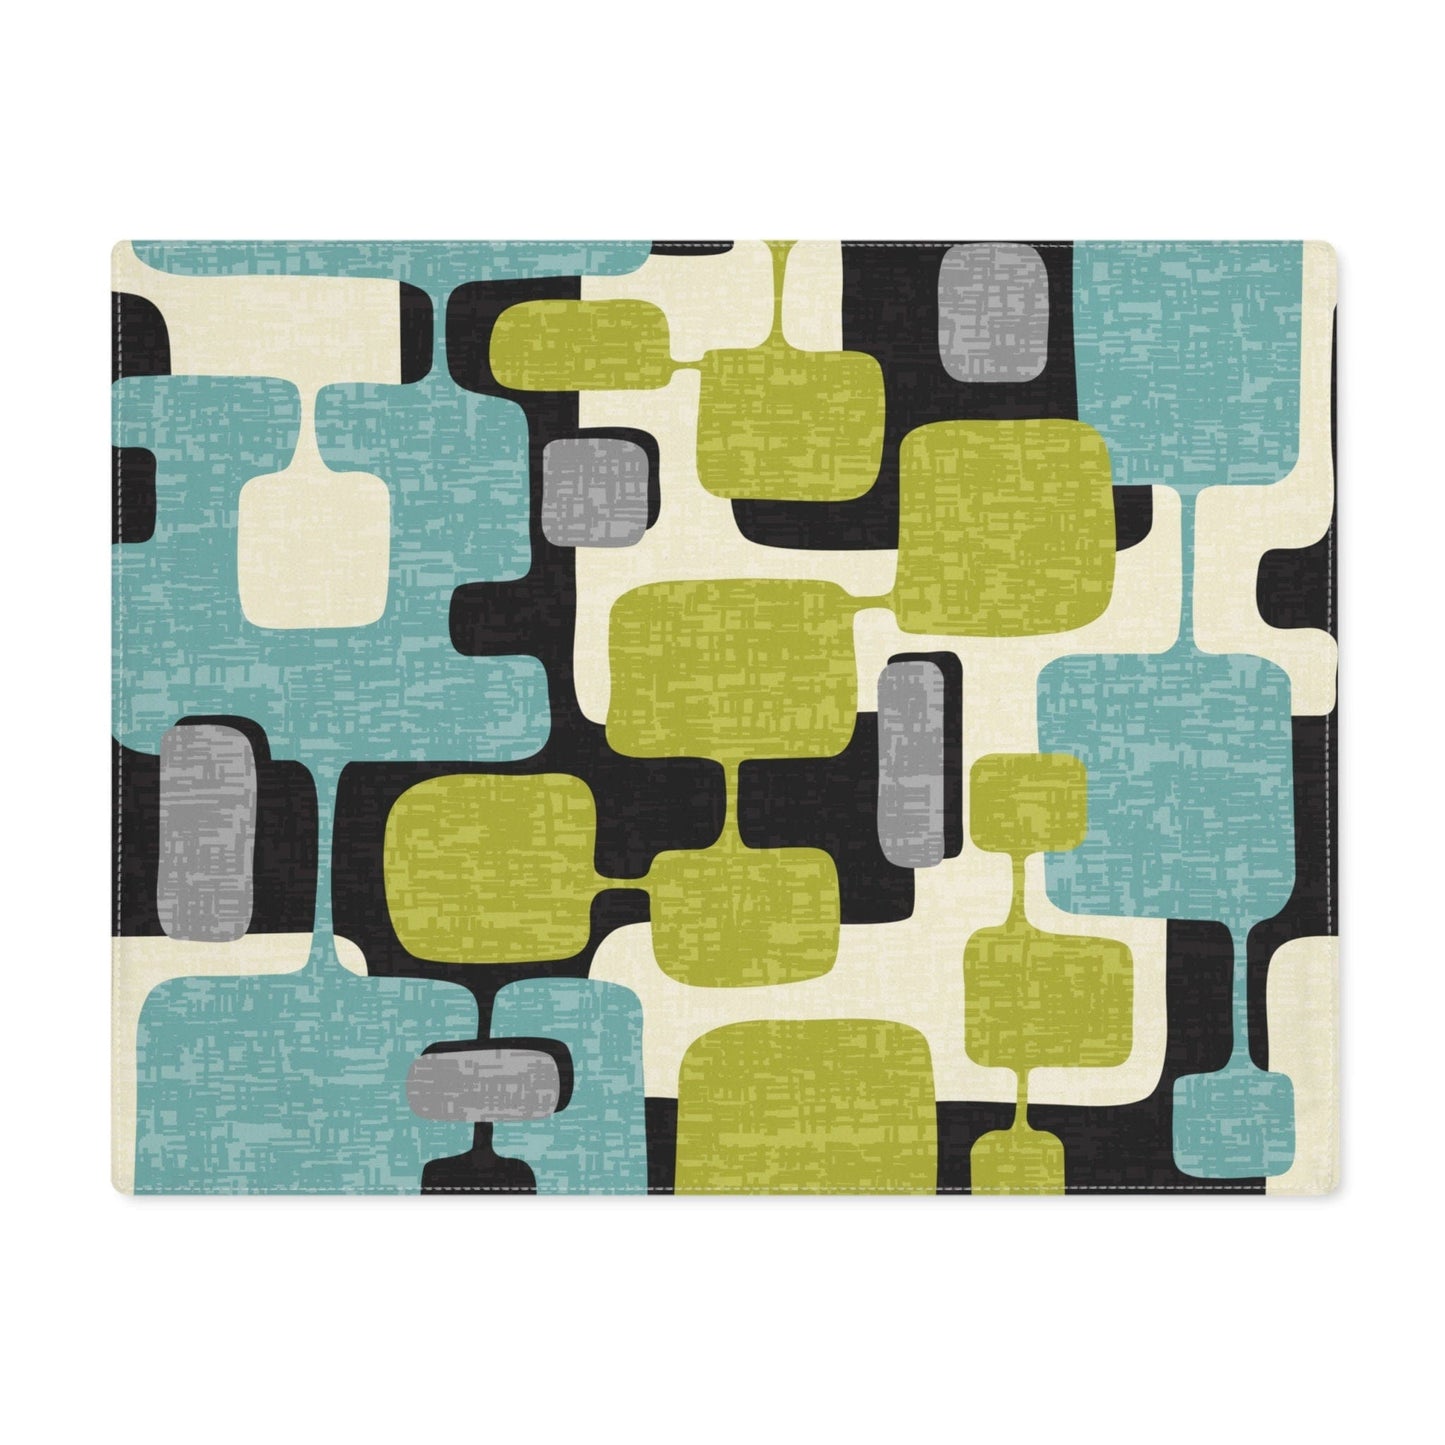 Kate McEnroe New York Mid Century Modern Geometric Abstract Placemats, Retro Teal, Lime Green, Gray, Black MCM Table Linens Placemats 11614579044325381528